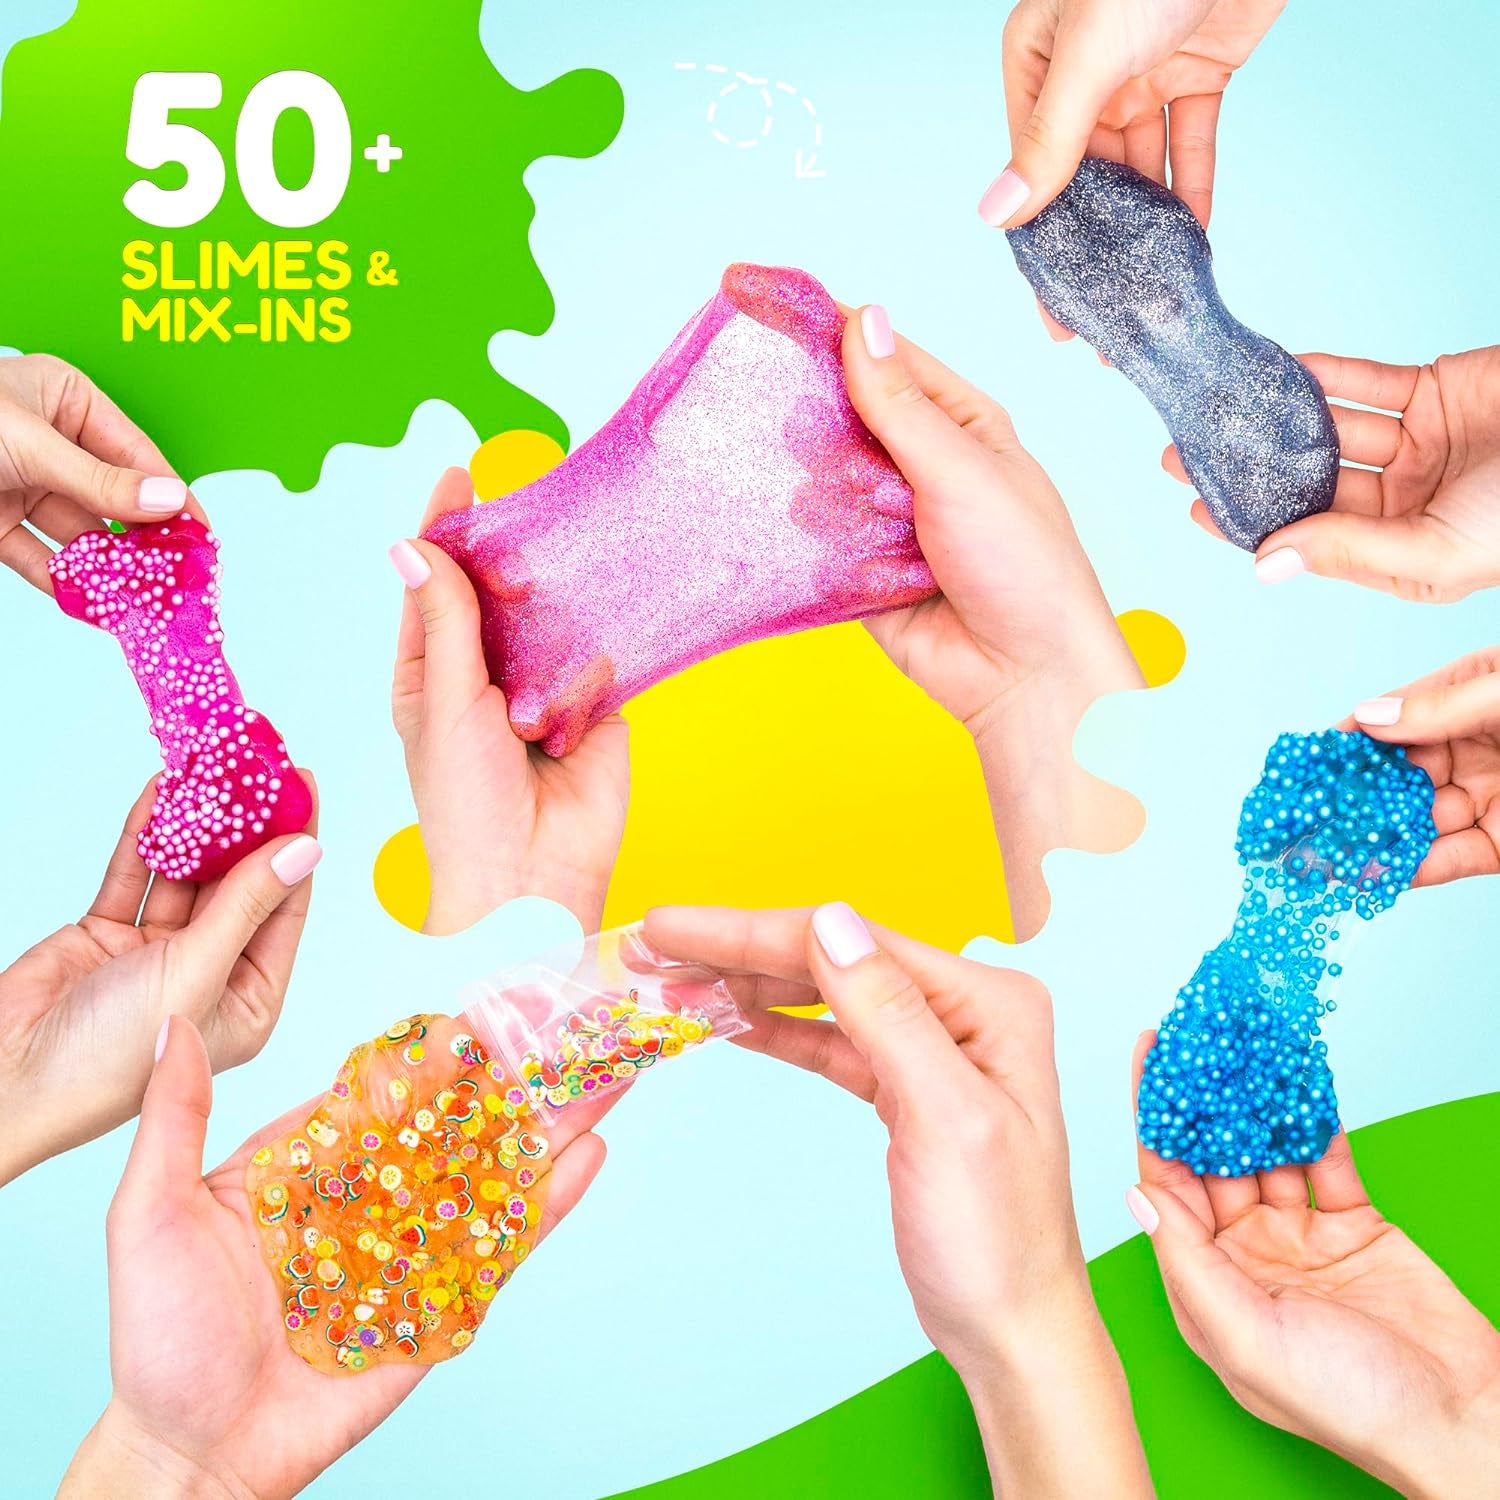 Ultimate Slime Kit for Girls 10-12 | Perfect Toys for Girls 7-12 Years Old | Complete DIY Slime Making Kit for Kids and Boys | Christmas Party Favors